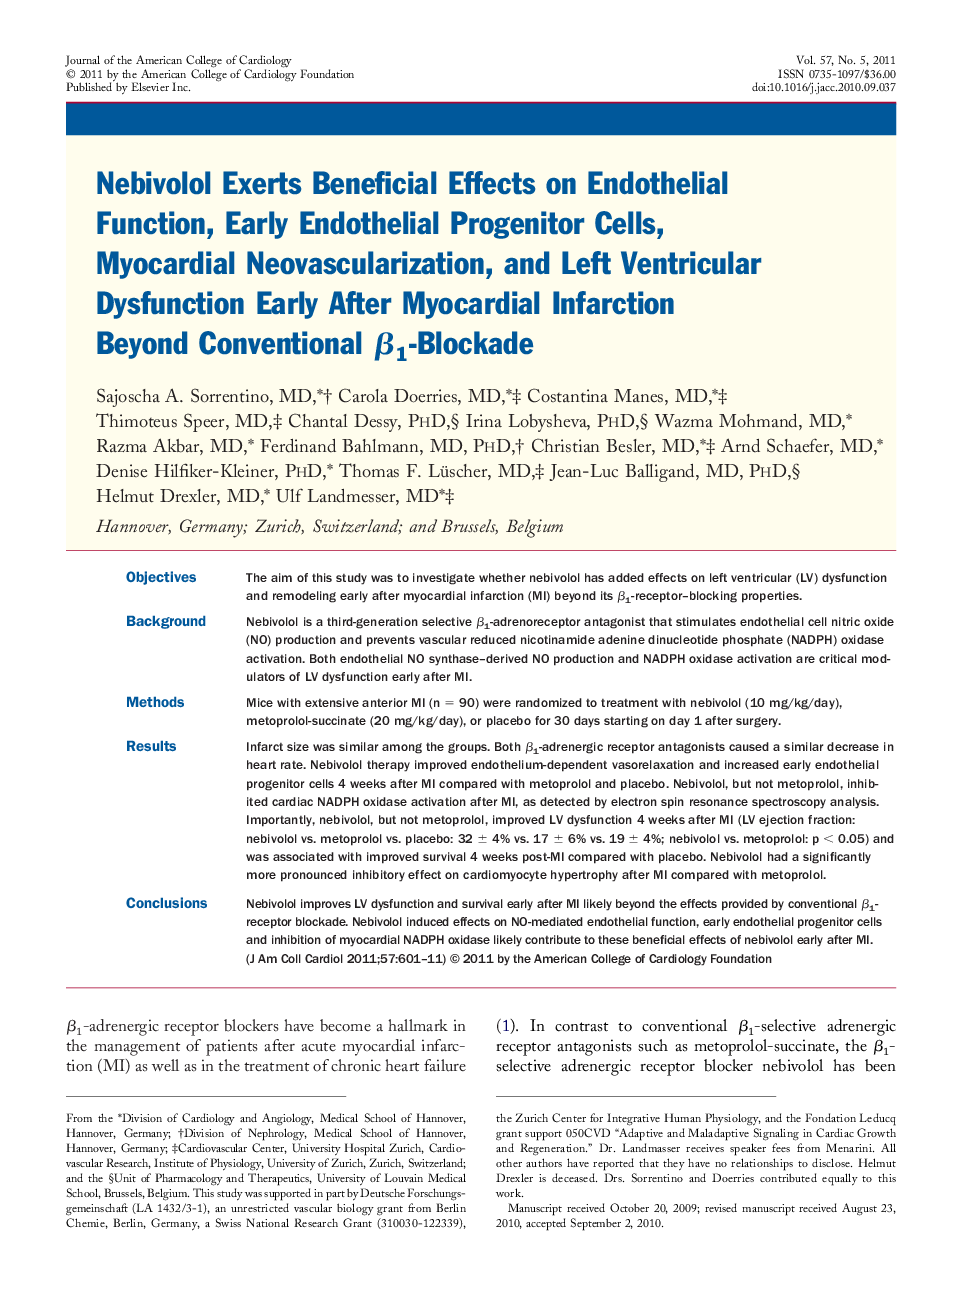 Nebivolol Exerts Beneficial Effects on Endothelial Function, Early Endothelial Progenitor Cells, Myocardial Neovascularization, and Left Ventricular Dysfunction Early After Myocardial Infarction Beyond Conventional β1-Blockade 